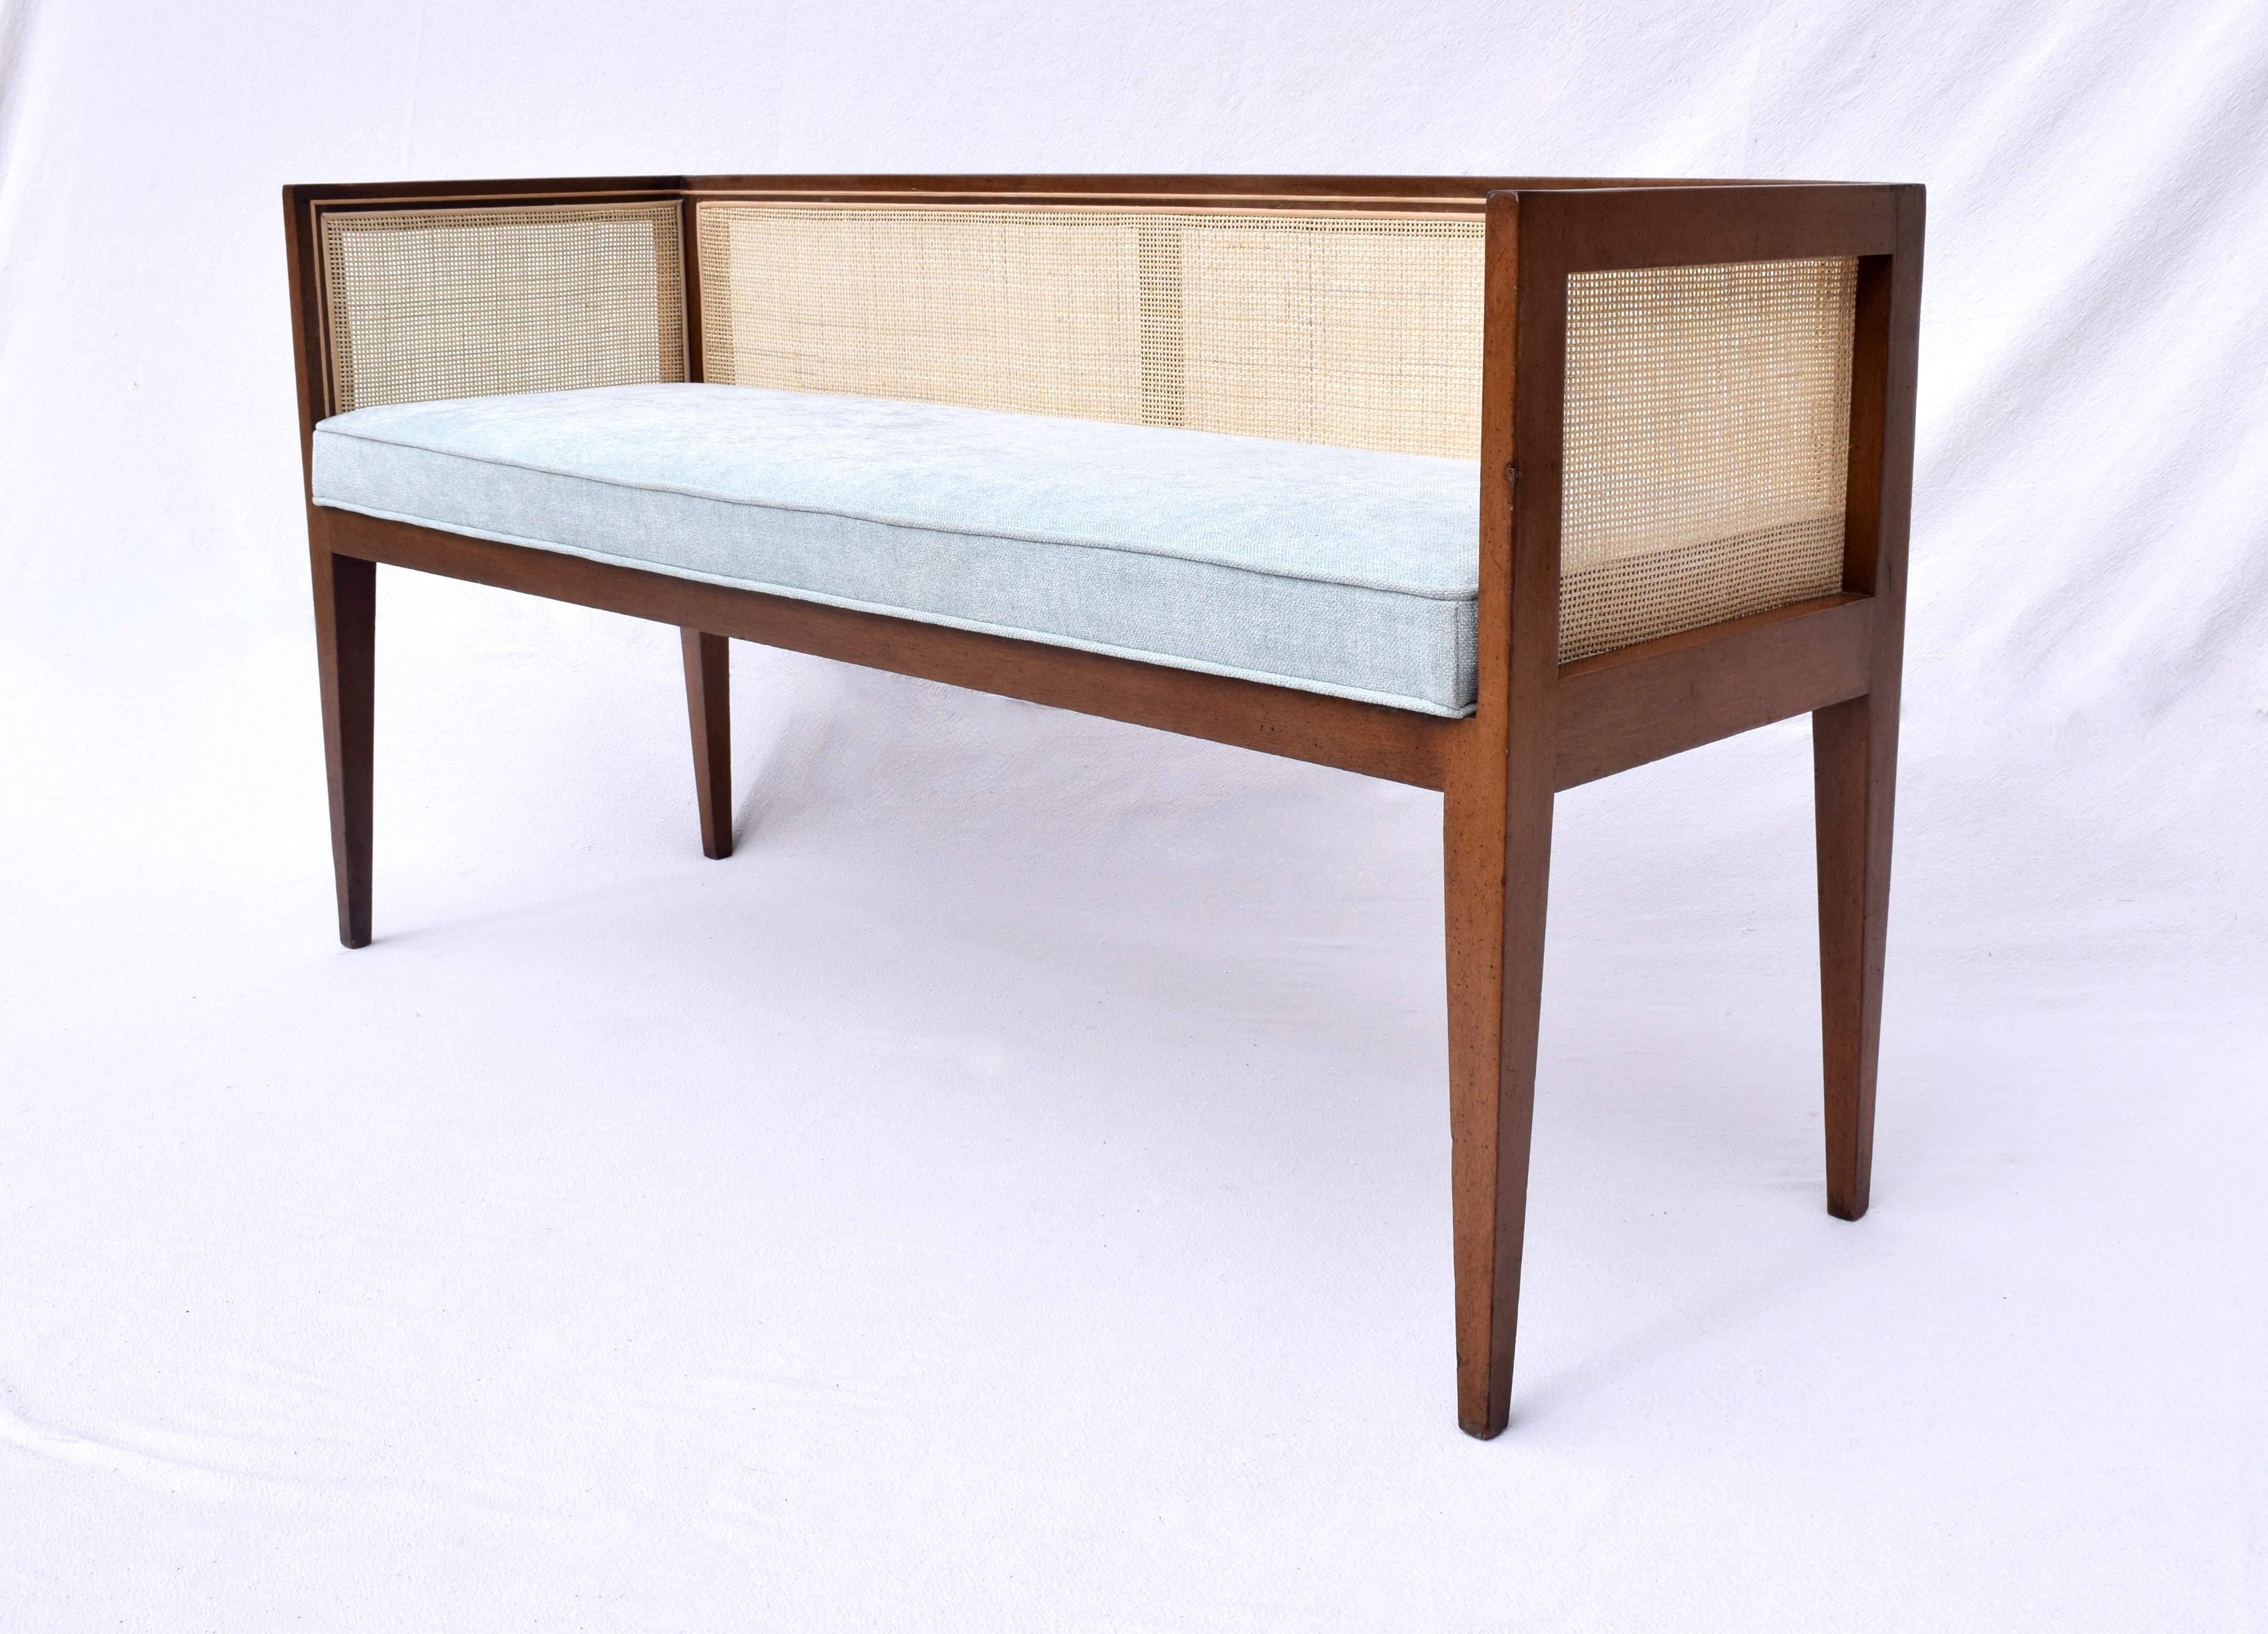 Upholstery 1950s Walnut Window Bench Attributed to Edward Wormley for Dunbar